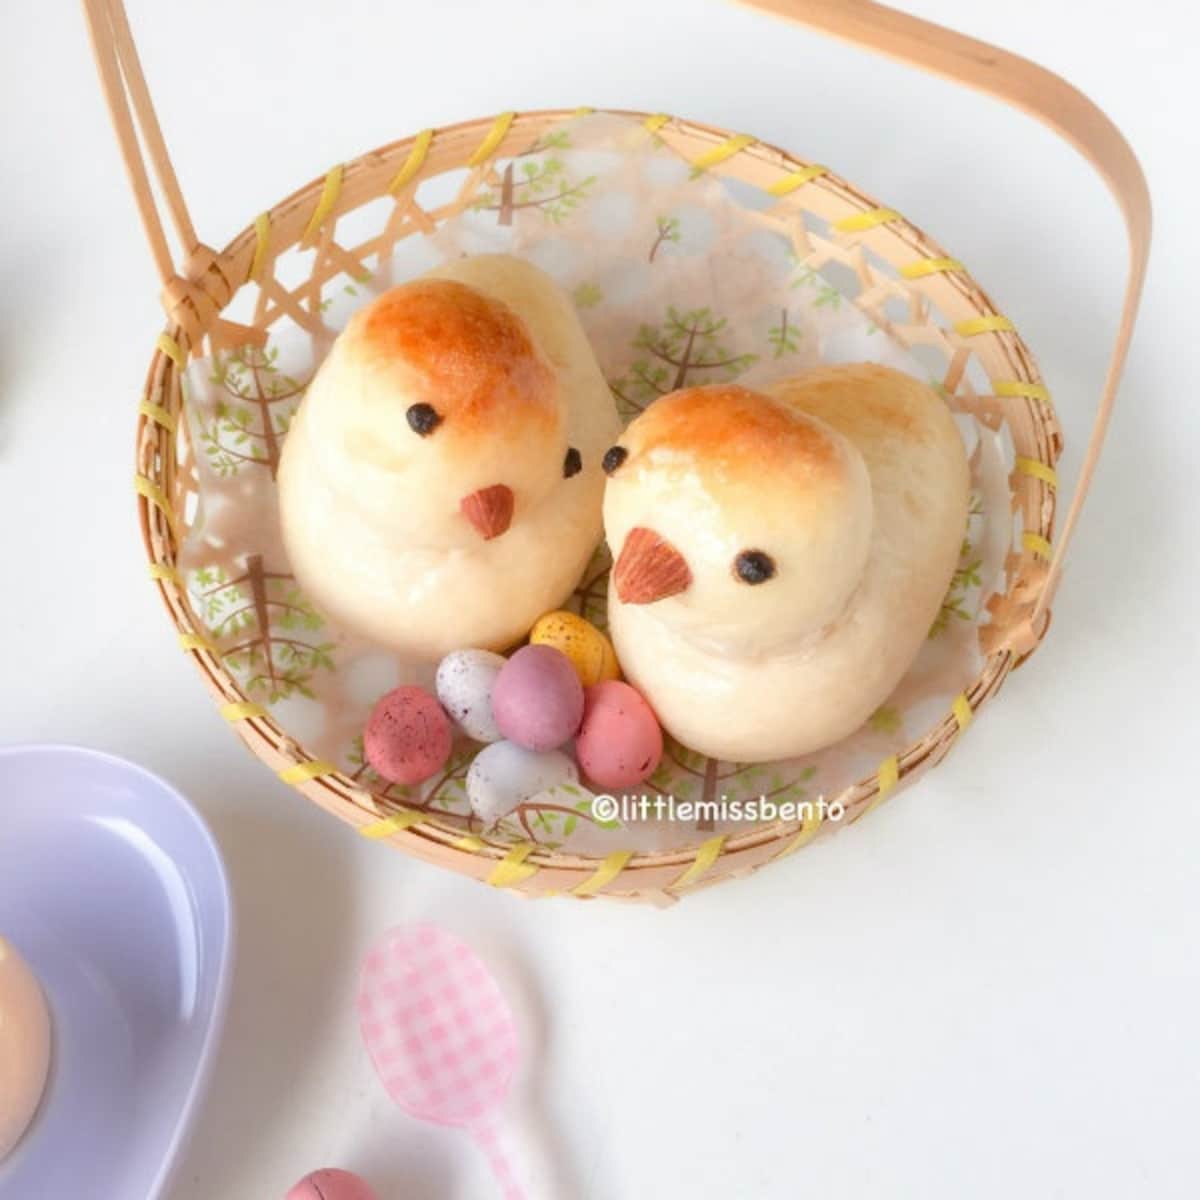 8 Adorable Animal Bread Recipes | All About Japan